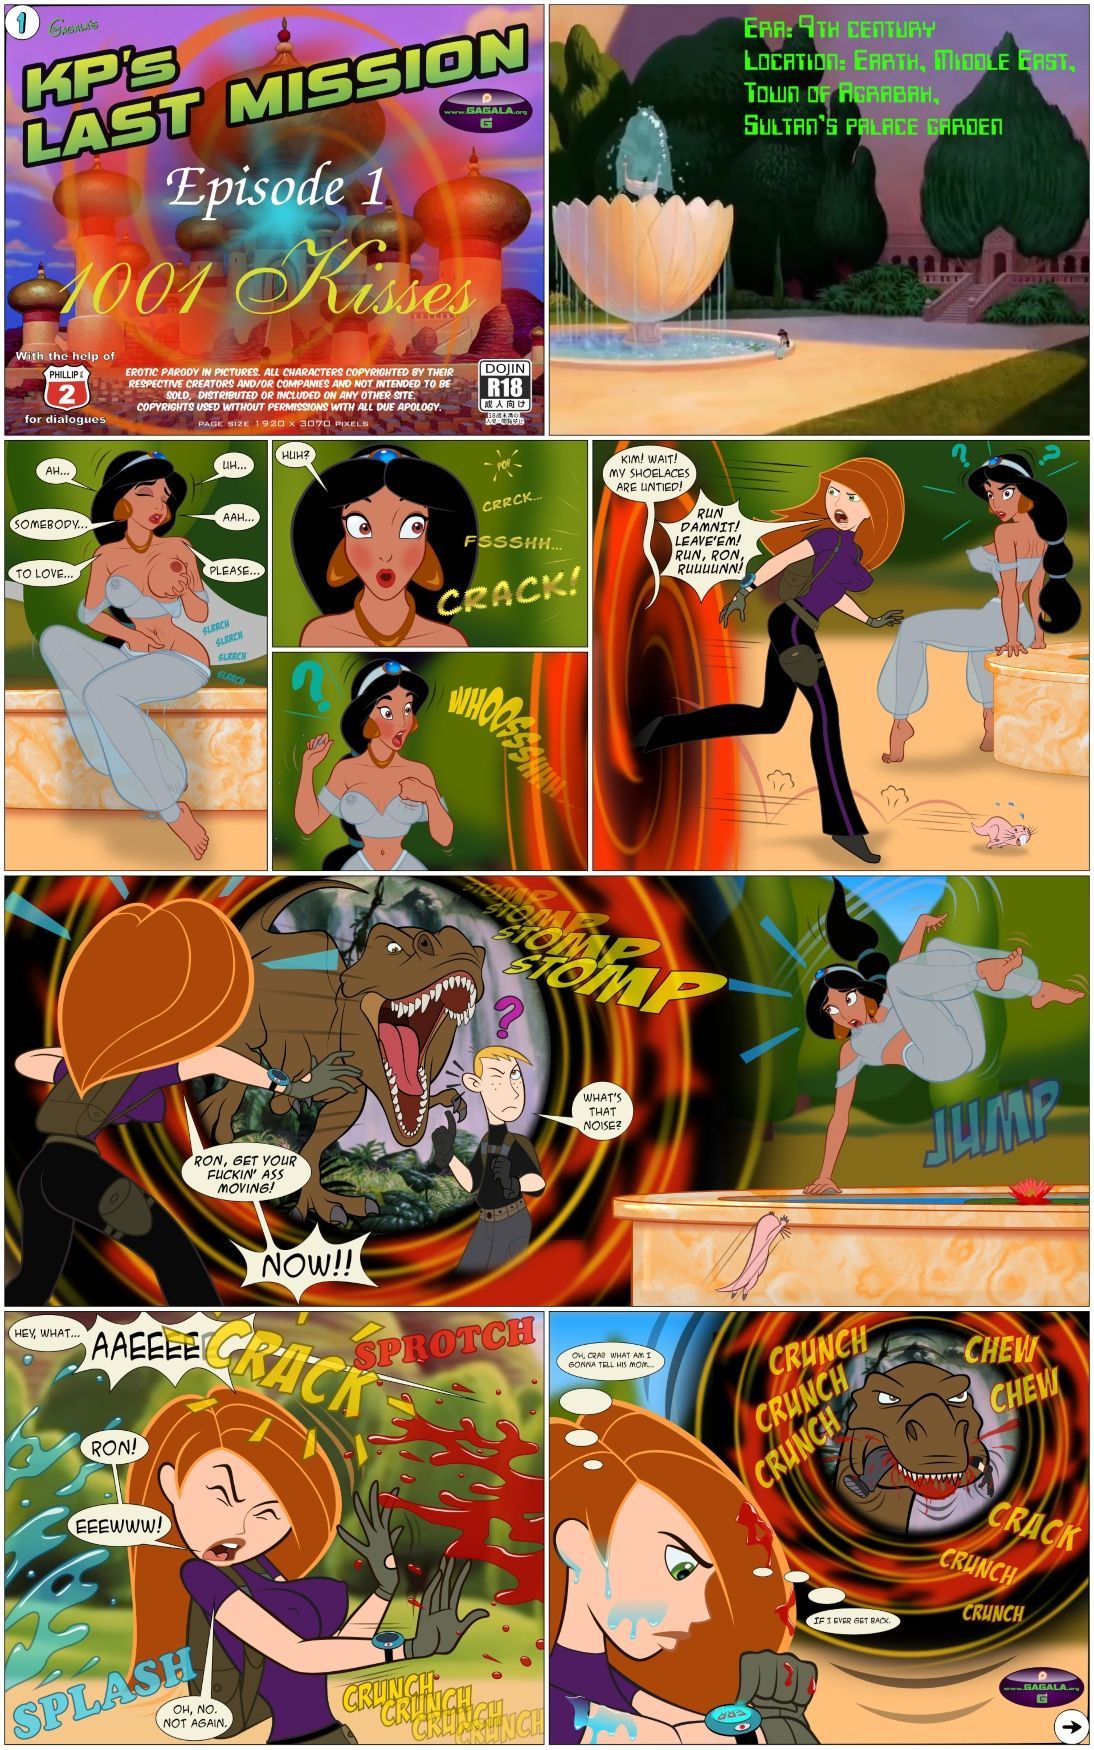 best of Cartoon kimpossible